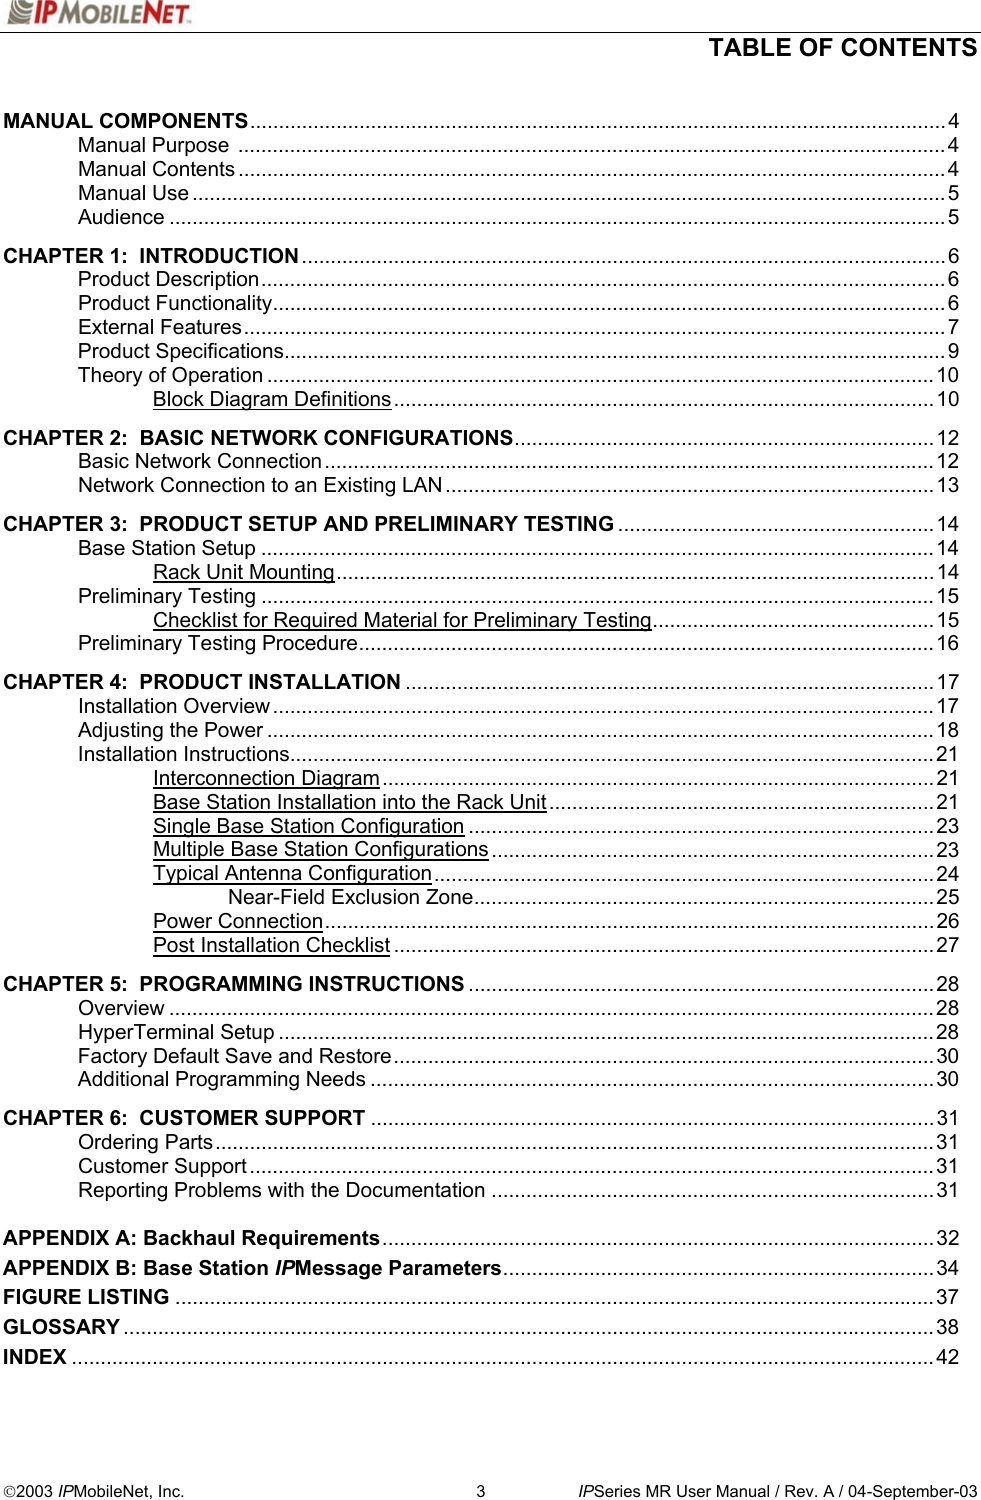  TABLE OF CONTENTS   2003 IPMobileNet, Inc.  3  IPSeries MR User Manual / Rev. A / 04-September-03 MANUAL COMPONENTS.........................................................................................................................4  Manual Purpose  ...........................................................................................................................4  Manual Contents ...........................................................................................................................4  Manual Use ...................................................................................................................................5  Audience .......................................................................................................................................5  CHAPTER 1:  INTRODUCTION................................................................................................................6  Product Description.......................................................................................................................6  Product Functionality.....................................................................................................................6  External Features..........................................................................................................................7  Product Specifications...................................................................................................................9   Theory of Operation ....................................................................................................................10   Block Diagram Definitions..............................................................................................10  CHAPTER 2:  BASIC NETWORK CONFIGURATIONS.........................................................................12  Basic Network Connection..........................................................................................................12  Network Connection to an Existing LAN.....................................................................................13  CHAPTER 3:  PRODUCT SETUP AND PRELIMINARY TESTING .......................................................14  Base Station Setup .....................................................................................................................14   Rack Unit Mounting........................................................................................................14  Preliminary Testing .....................................................................................................................15     Checklist for Required Material for Preliminary Testing.................................................15  Preliminary Testing Procedure....................................................................................................16   CHAPTER 4:  PRODUCT INSTALLATION ............................................................................................17  Installation Overview ...................................................................................................................17  Adjusting the Power ....................................................................................................................18  Installation Instructions................................................................................................................21   Interconnection Diagram................................................................................................21     Base Station Installation into the Rack Unit...................................................................21     Single Base Station Configuration .................................................................................23     Multiple Base Station Configurations............................................................................. 23   Typical Antenna Configuration.......................................................................................24    Near-Field Exclusion Zone................................................................................25   Power Connection..........................................................................................................26   Post Installation Checklist ..............................................................................................27  CHAPTER 5:  PROGRAMMING INSTRUCTIONS .................................................................................28  Overview .....................................................................................................................................28  HyperTerminal Setup ..................................................................................................................28  Factory Default Save and Restore..............................................................................................30 Additional Programming Needs ..................................................................................................30   CHAPTER 6:  CUSTOMER SUPPORT ..................................................................................................31  Ordering Parts.............................................................................................................................31  Customer Support .......................................................................................................................31   Reporting Problems with the Documentation .............................................................................31  APPENDIX A: Backhaul Requirements................................................................................................32 APPENDIX B: Base Station IPMessage Parameters........................................................................... 34 FIGURE LISTING ....................................................................................................................................37 GLOSSARY .............................................................................................................................................38 INDEX ......................................................................................................................................................42  